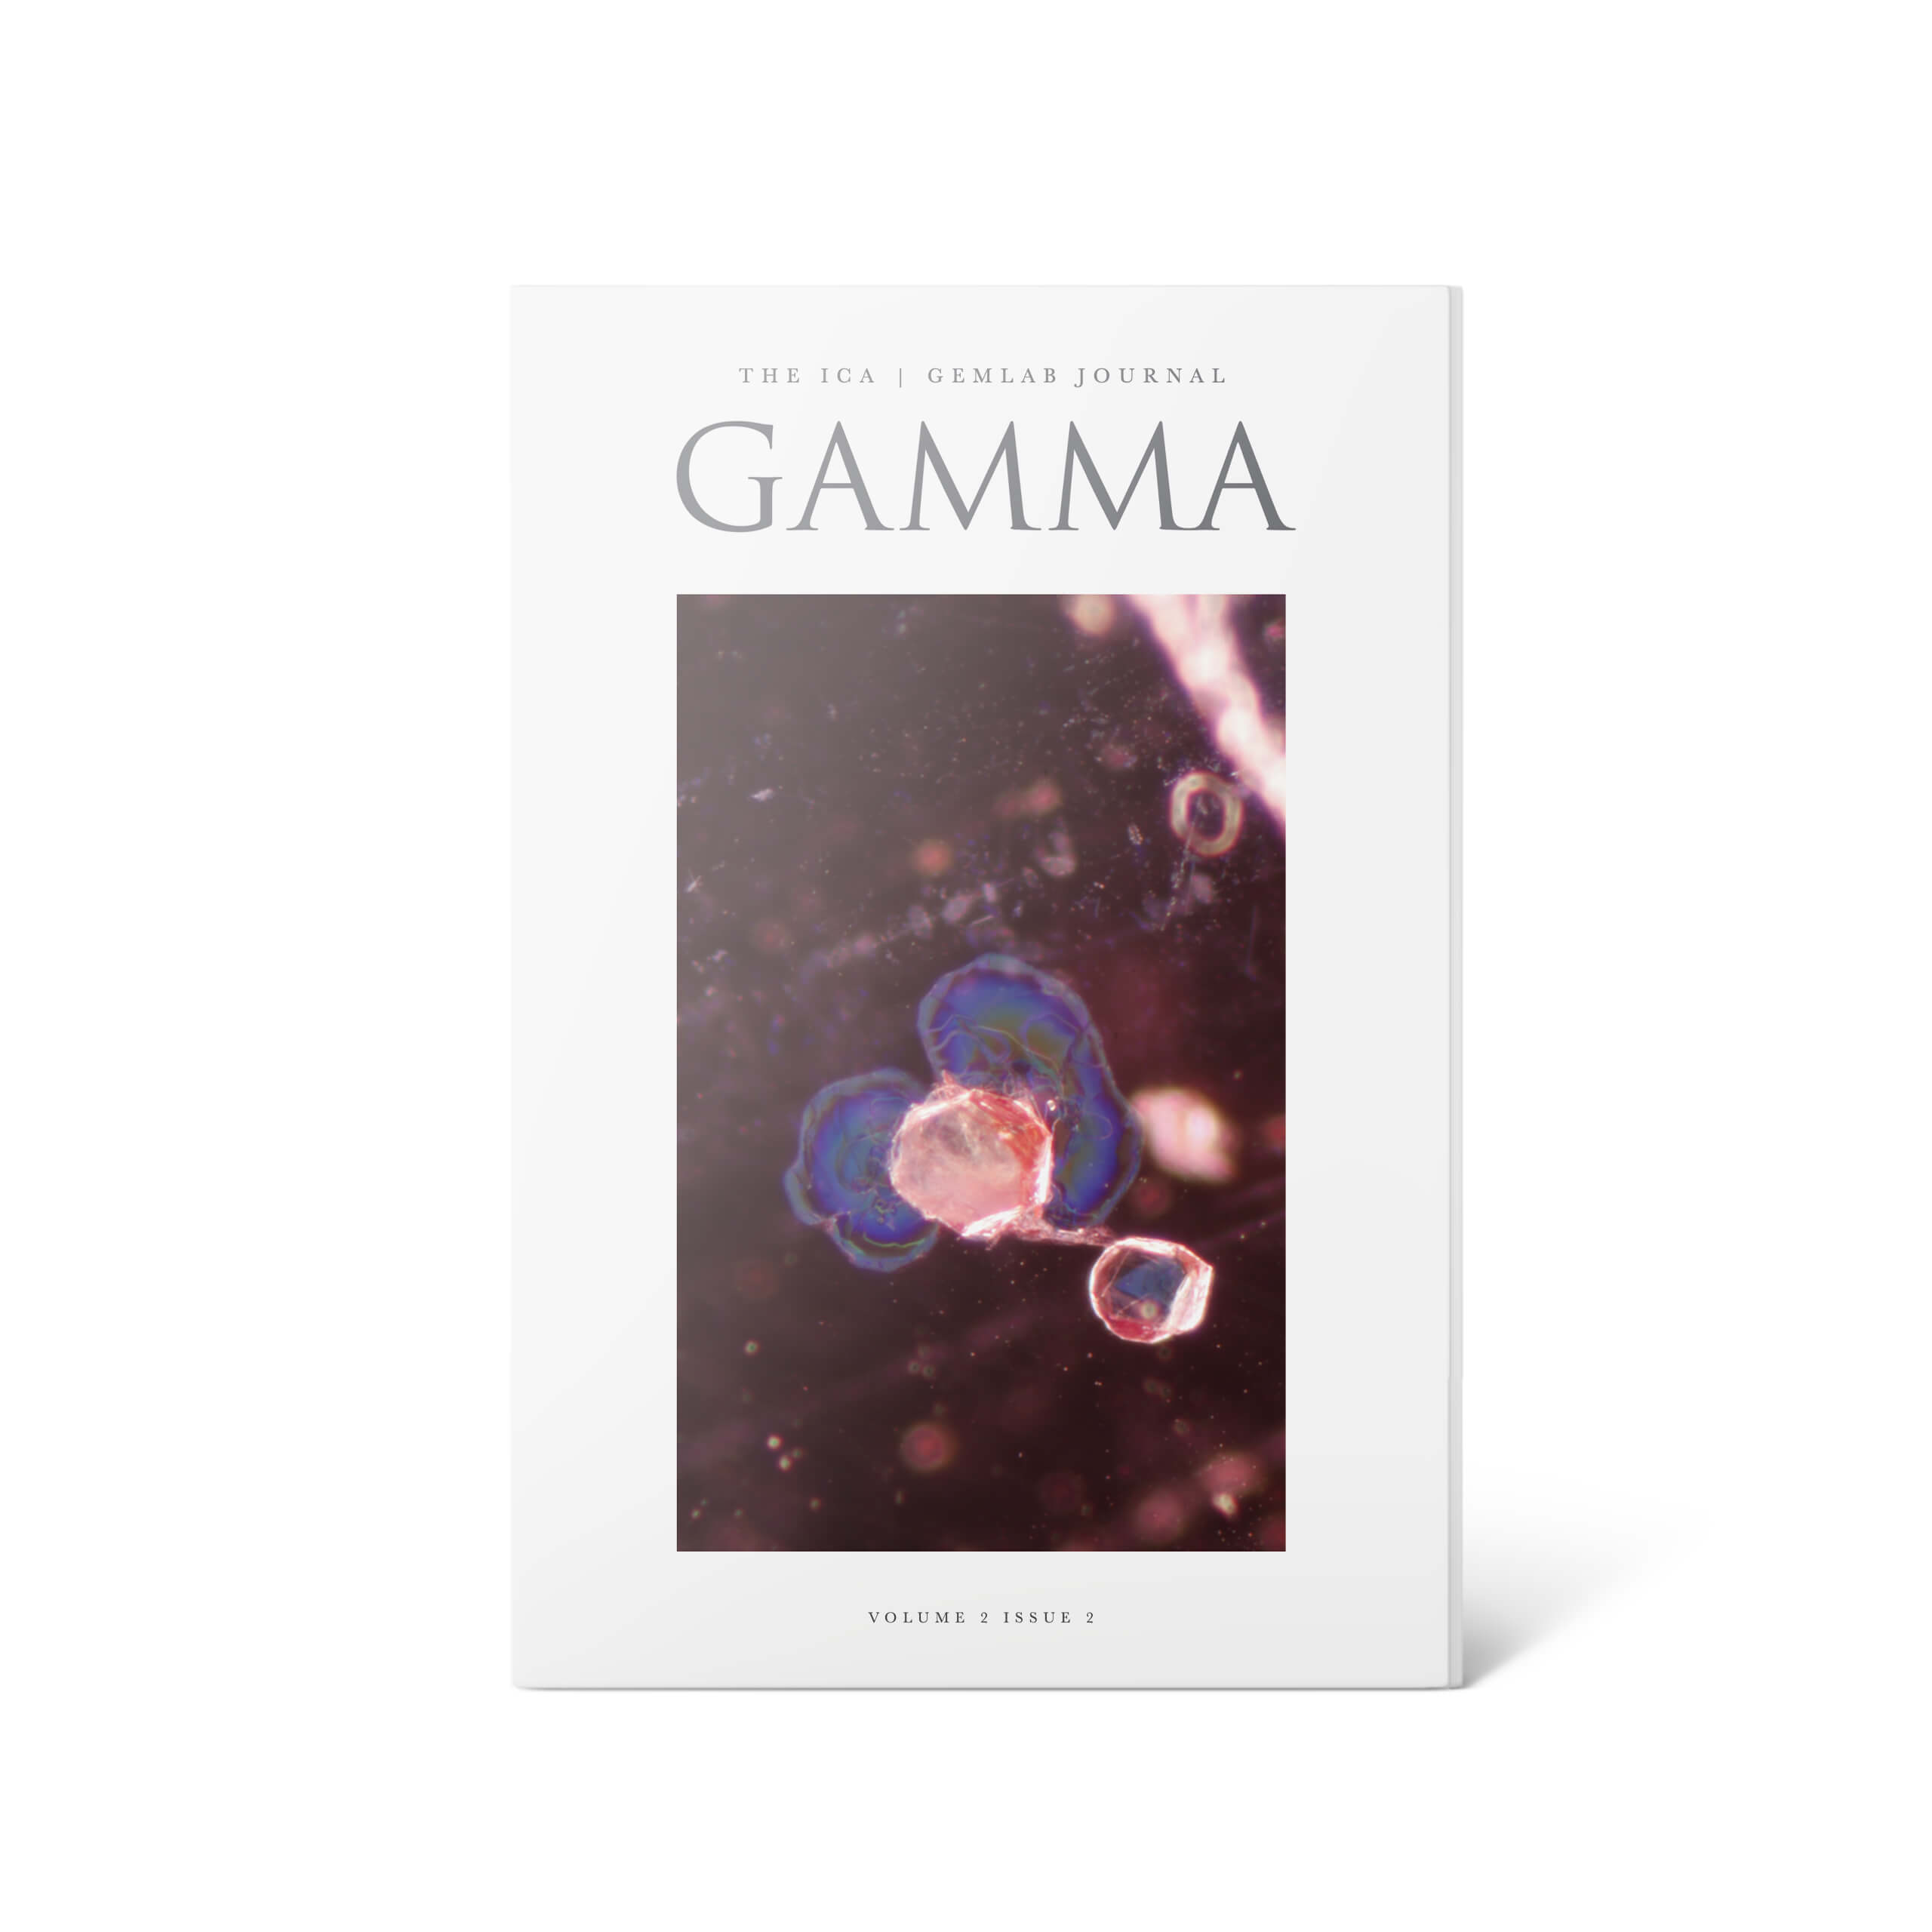 Gamma the ICA GemLab Gemmological journal. Volume 2 issue 2. Photomicrograph of an included crystal and its colourful tension halos seen within a FURA ruby from Mozambique.